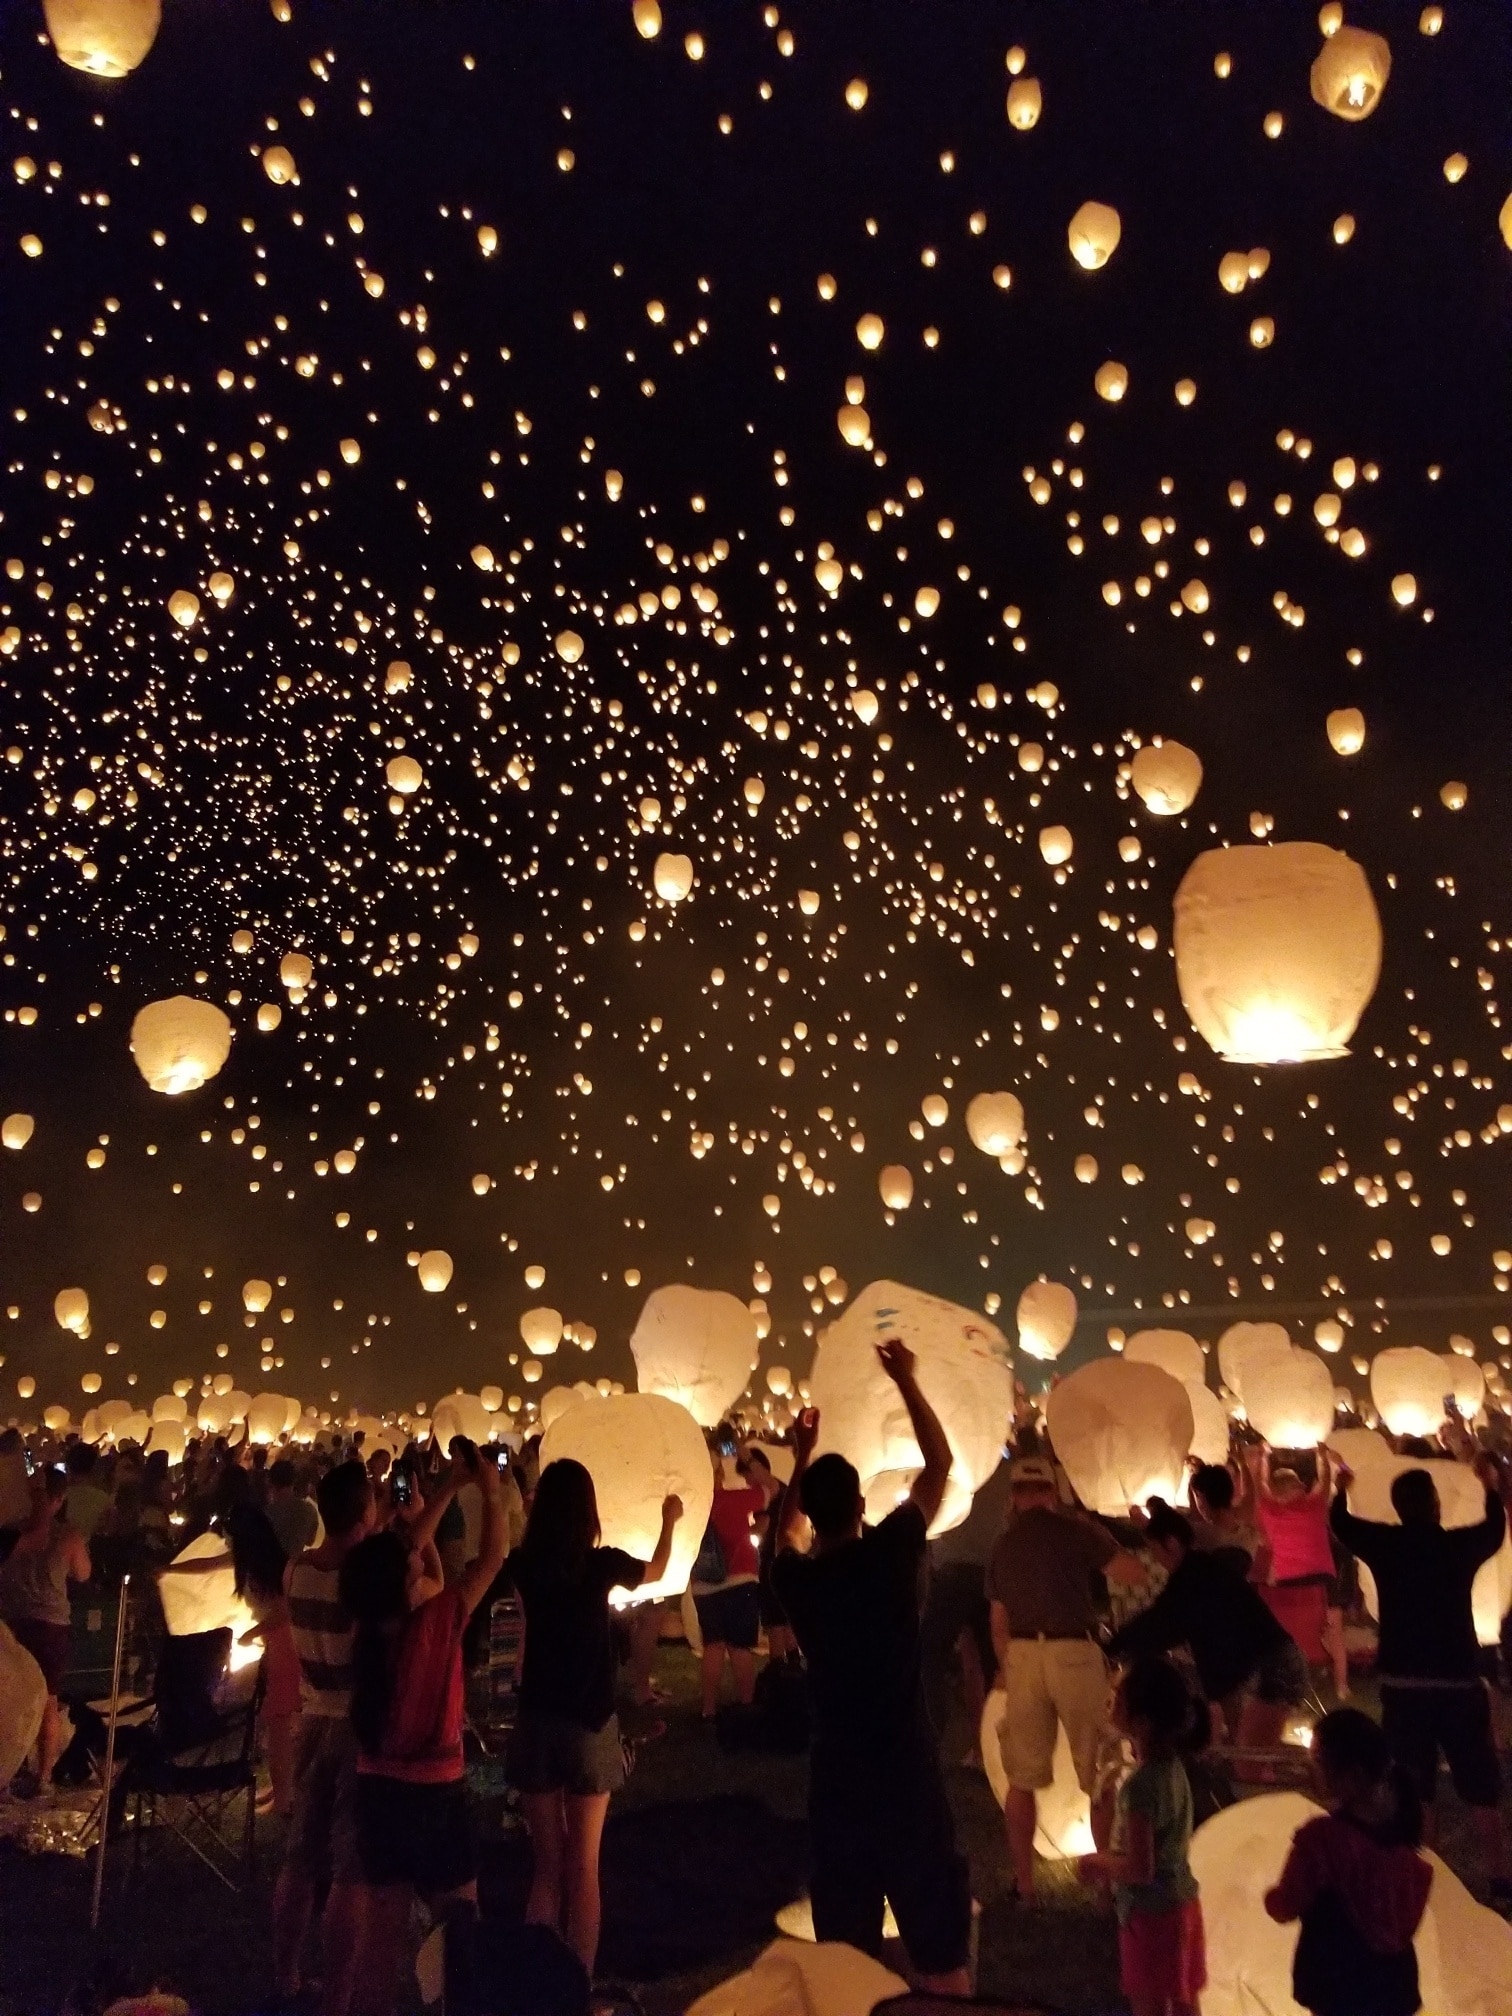 Lantern Fest outside of Philadelphia. Hard to put into words the beauty of the event once all the lanterns start floating into the sky. If you go to one of these events there's a lot of time to kill before it gets dark so bring some entertainment, snacks and beverages #LifeAtExpedia #Lights